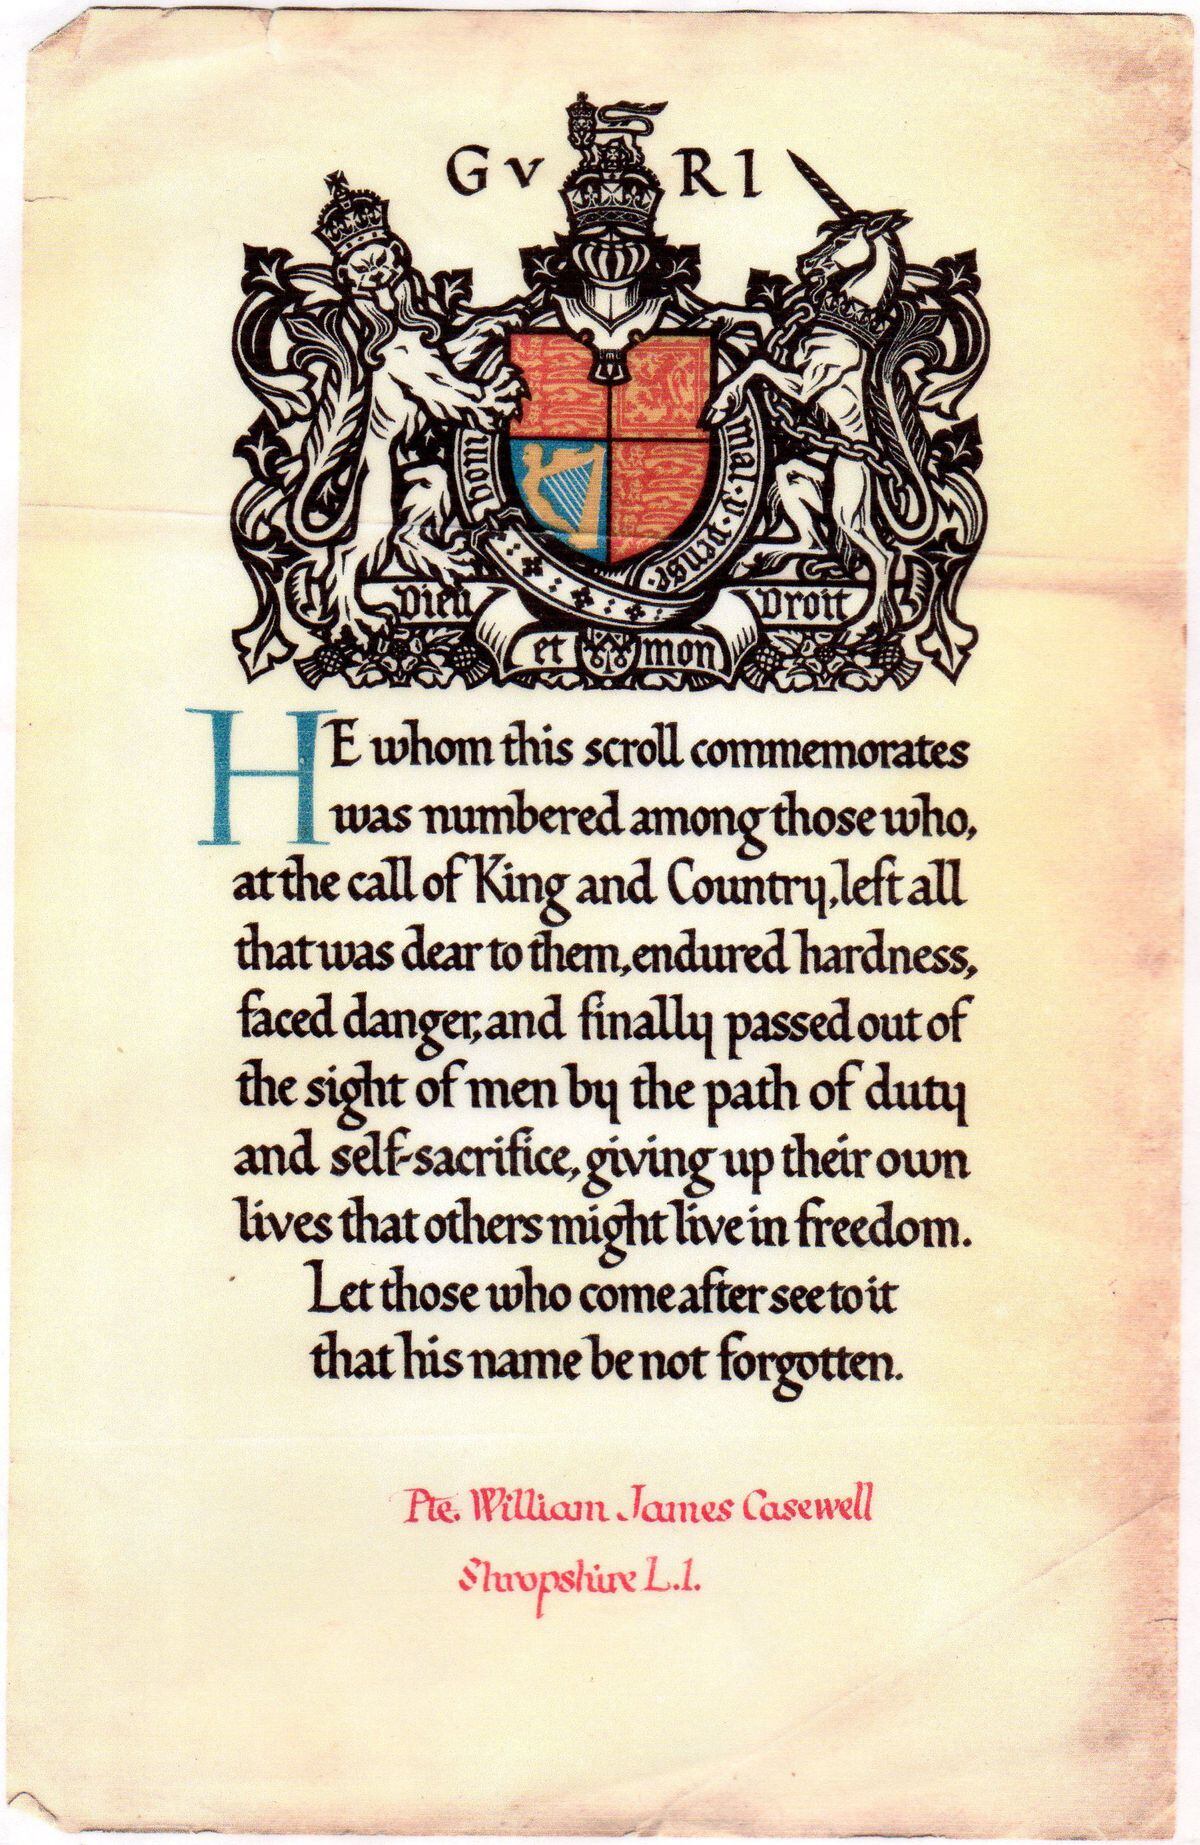 A scroll from the King dedicated to William James Casewell's military records